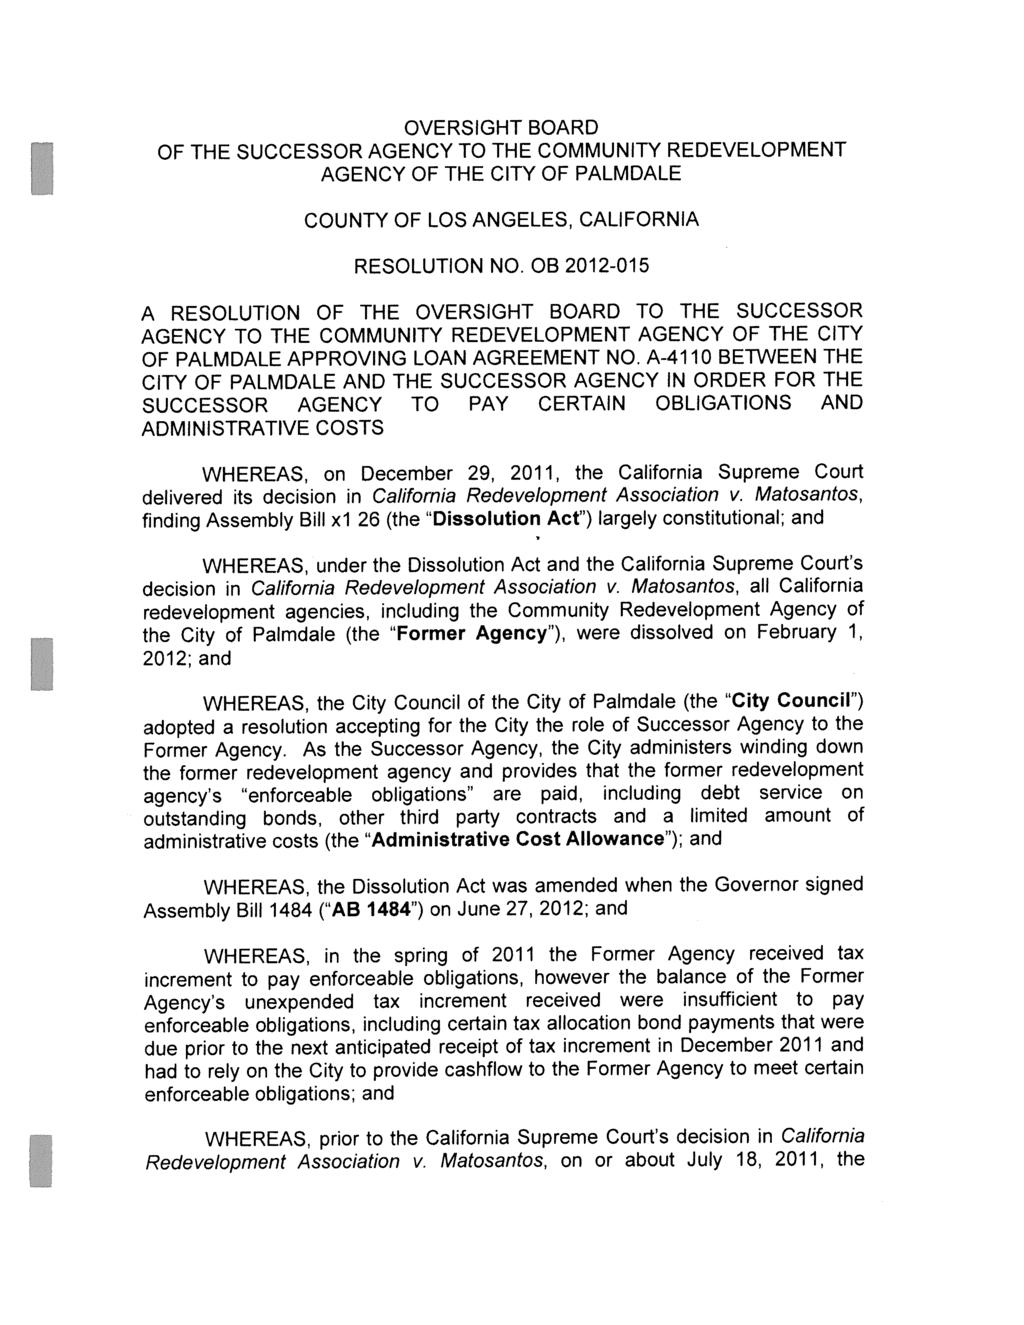 OVERSIGHT BOARD OF THE SUCCESSOR AGENCY TO THE COMMUNITY REDEVELOPMENT AGENCY OF THE CITY OF PALMDALE COUNTY OF LOS ANGELES, CALIFORNIA RESOLUTION NO.